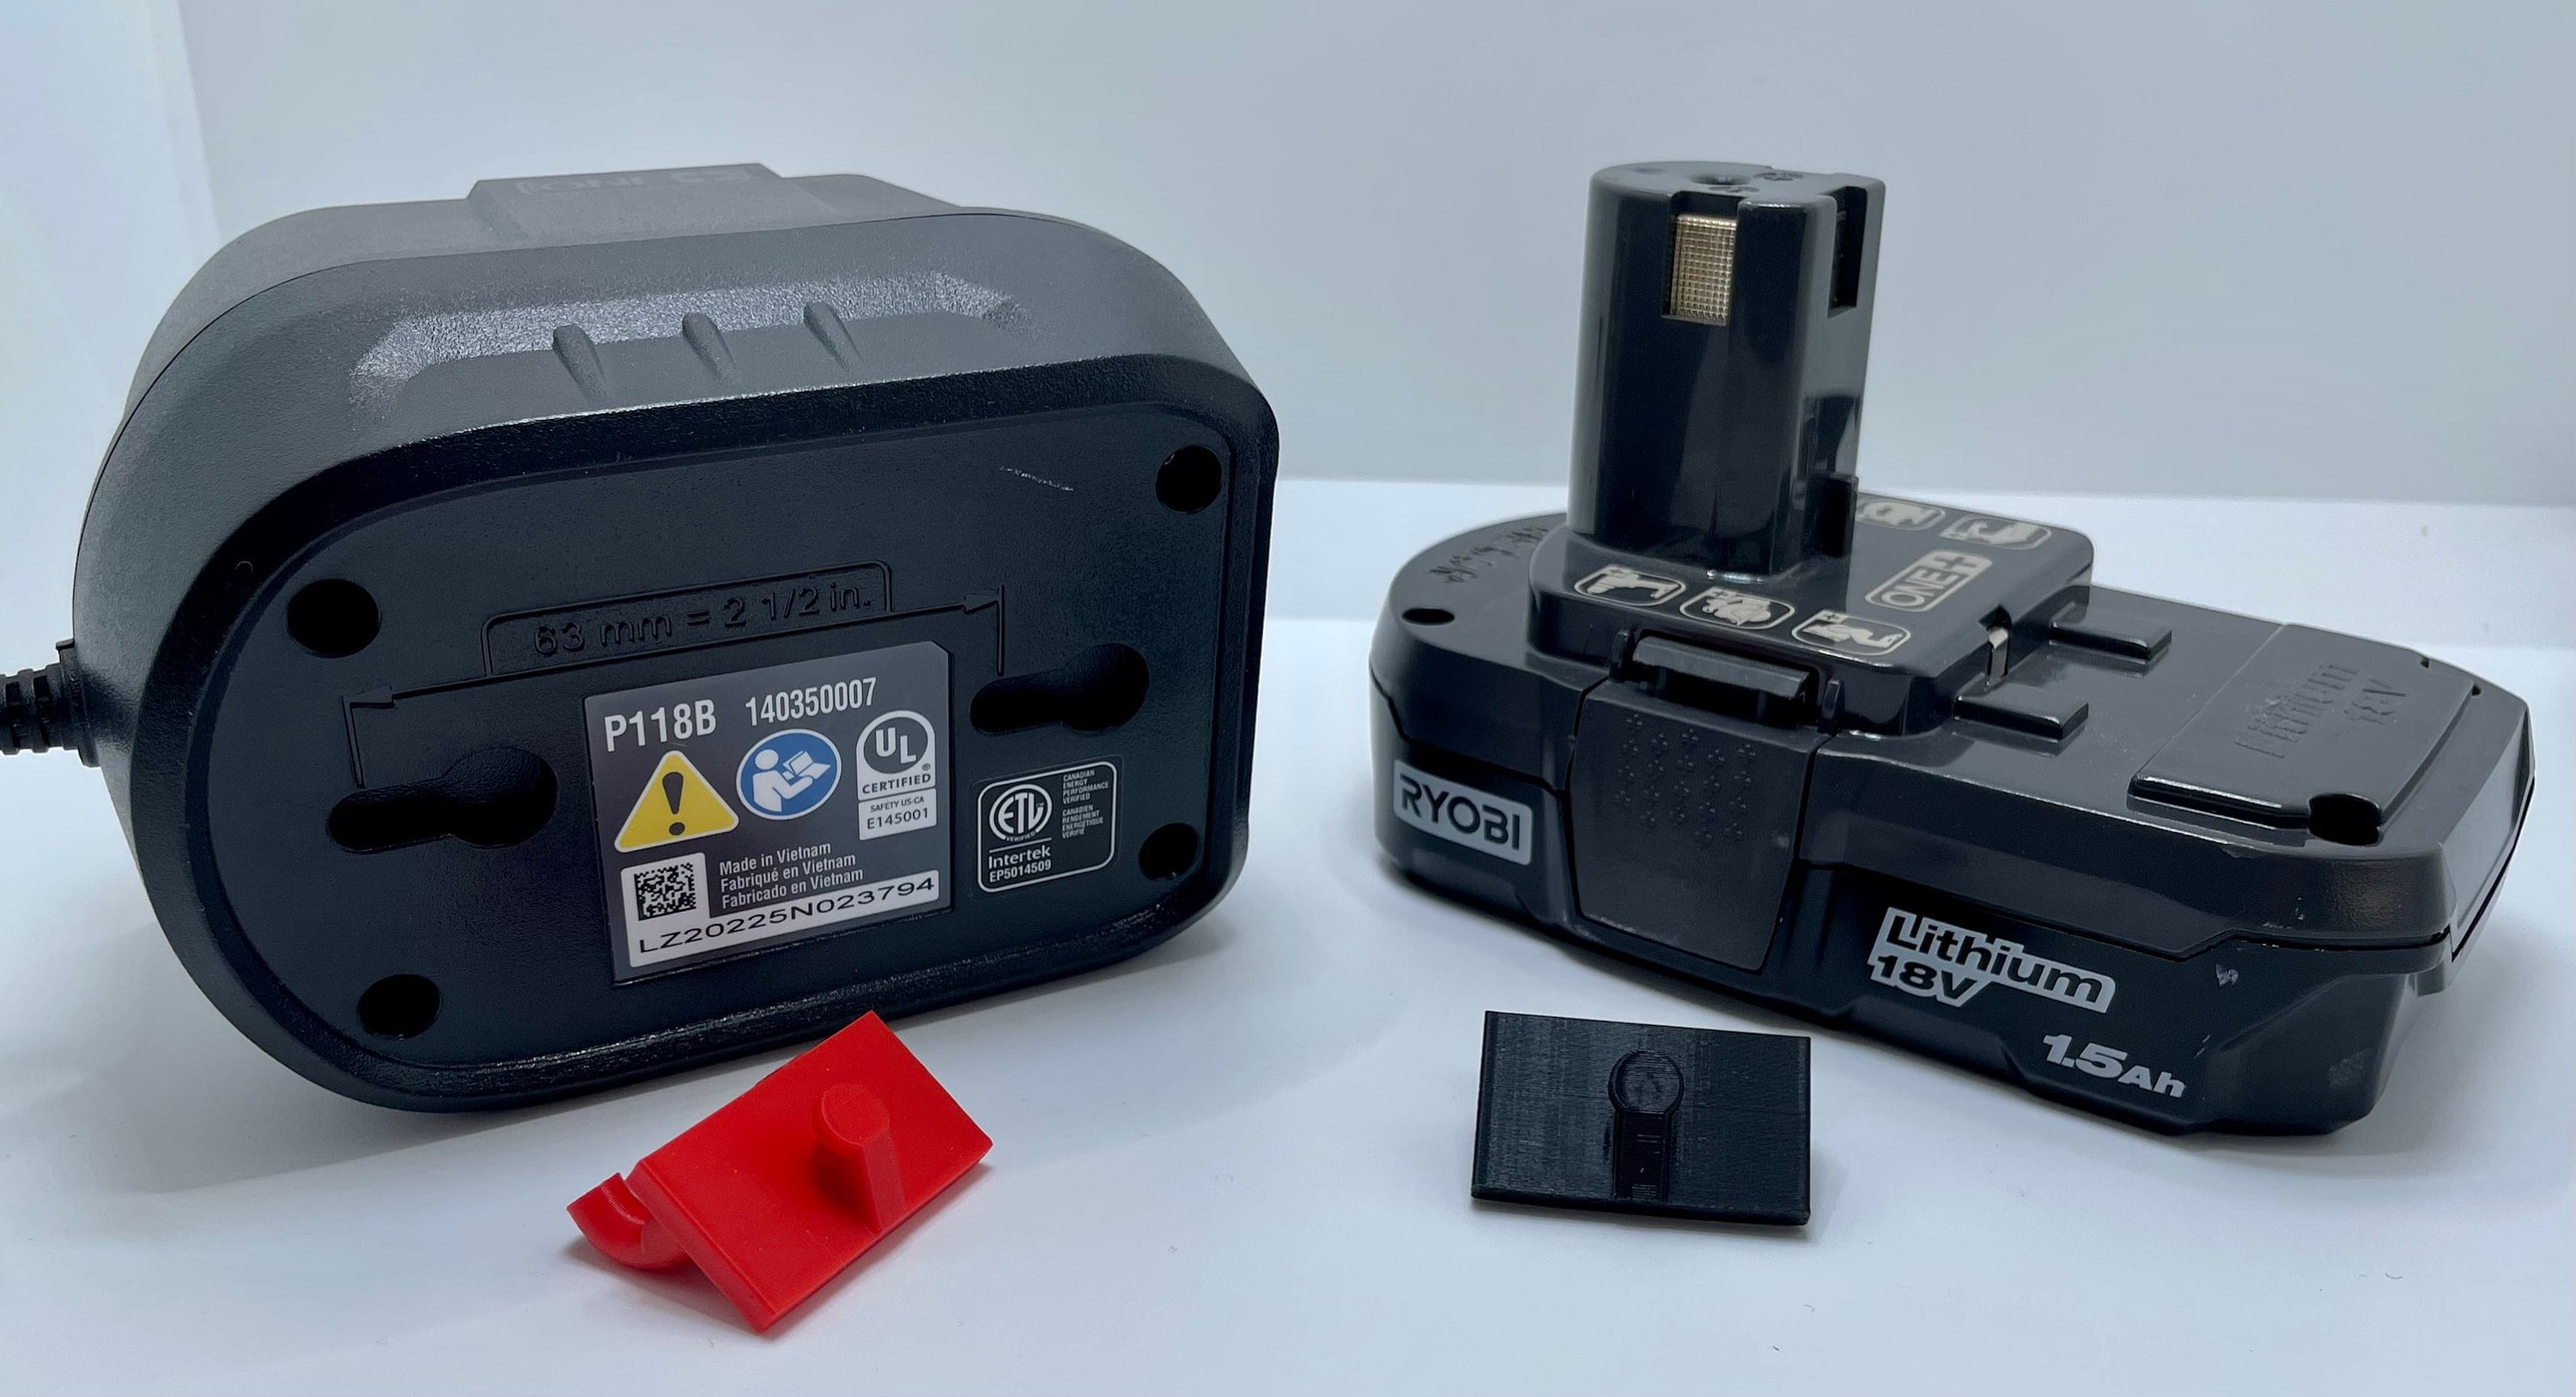 A LOOK INSIDE THE BLACK & DECKER LBXR20 20v MAX LITHIUM ION BATTERY -  Dewalt - Power Tool Forum – Tools in Action